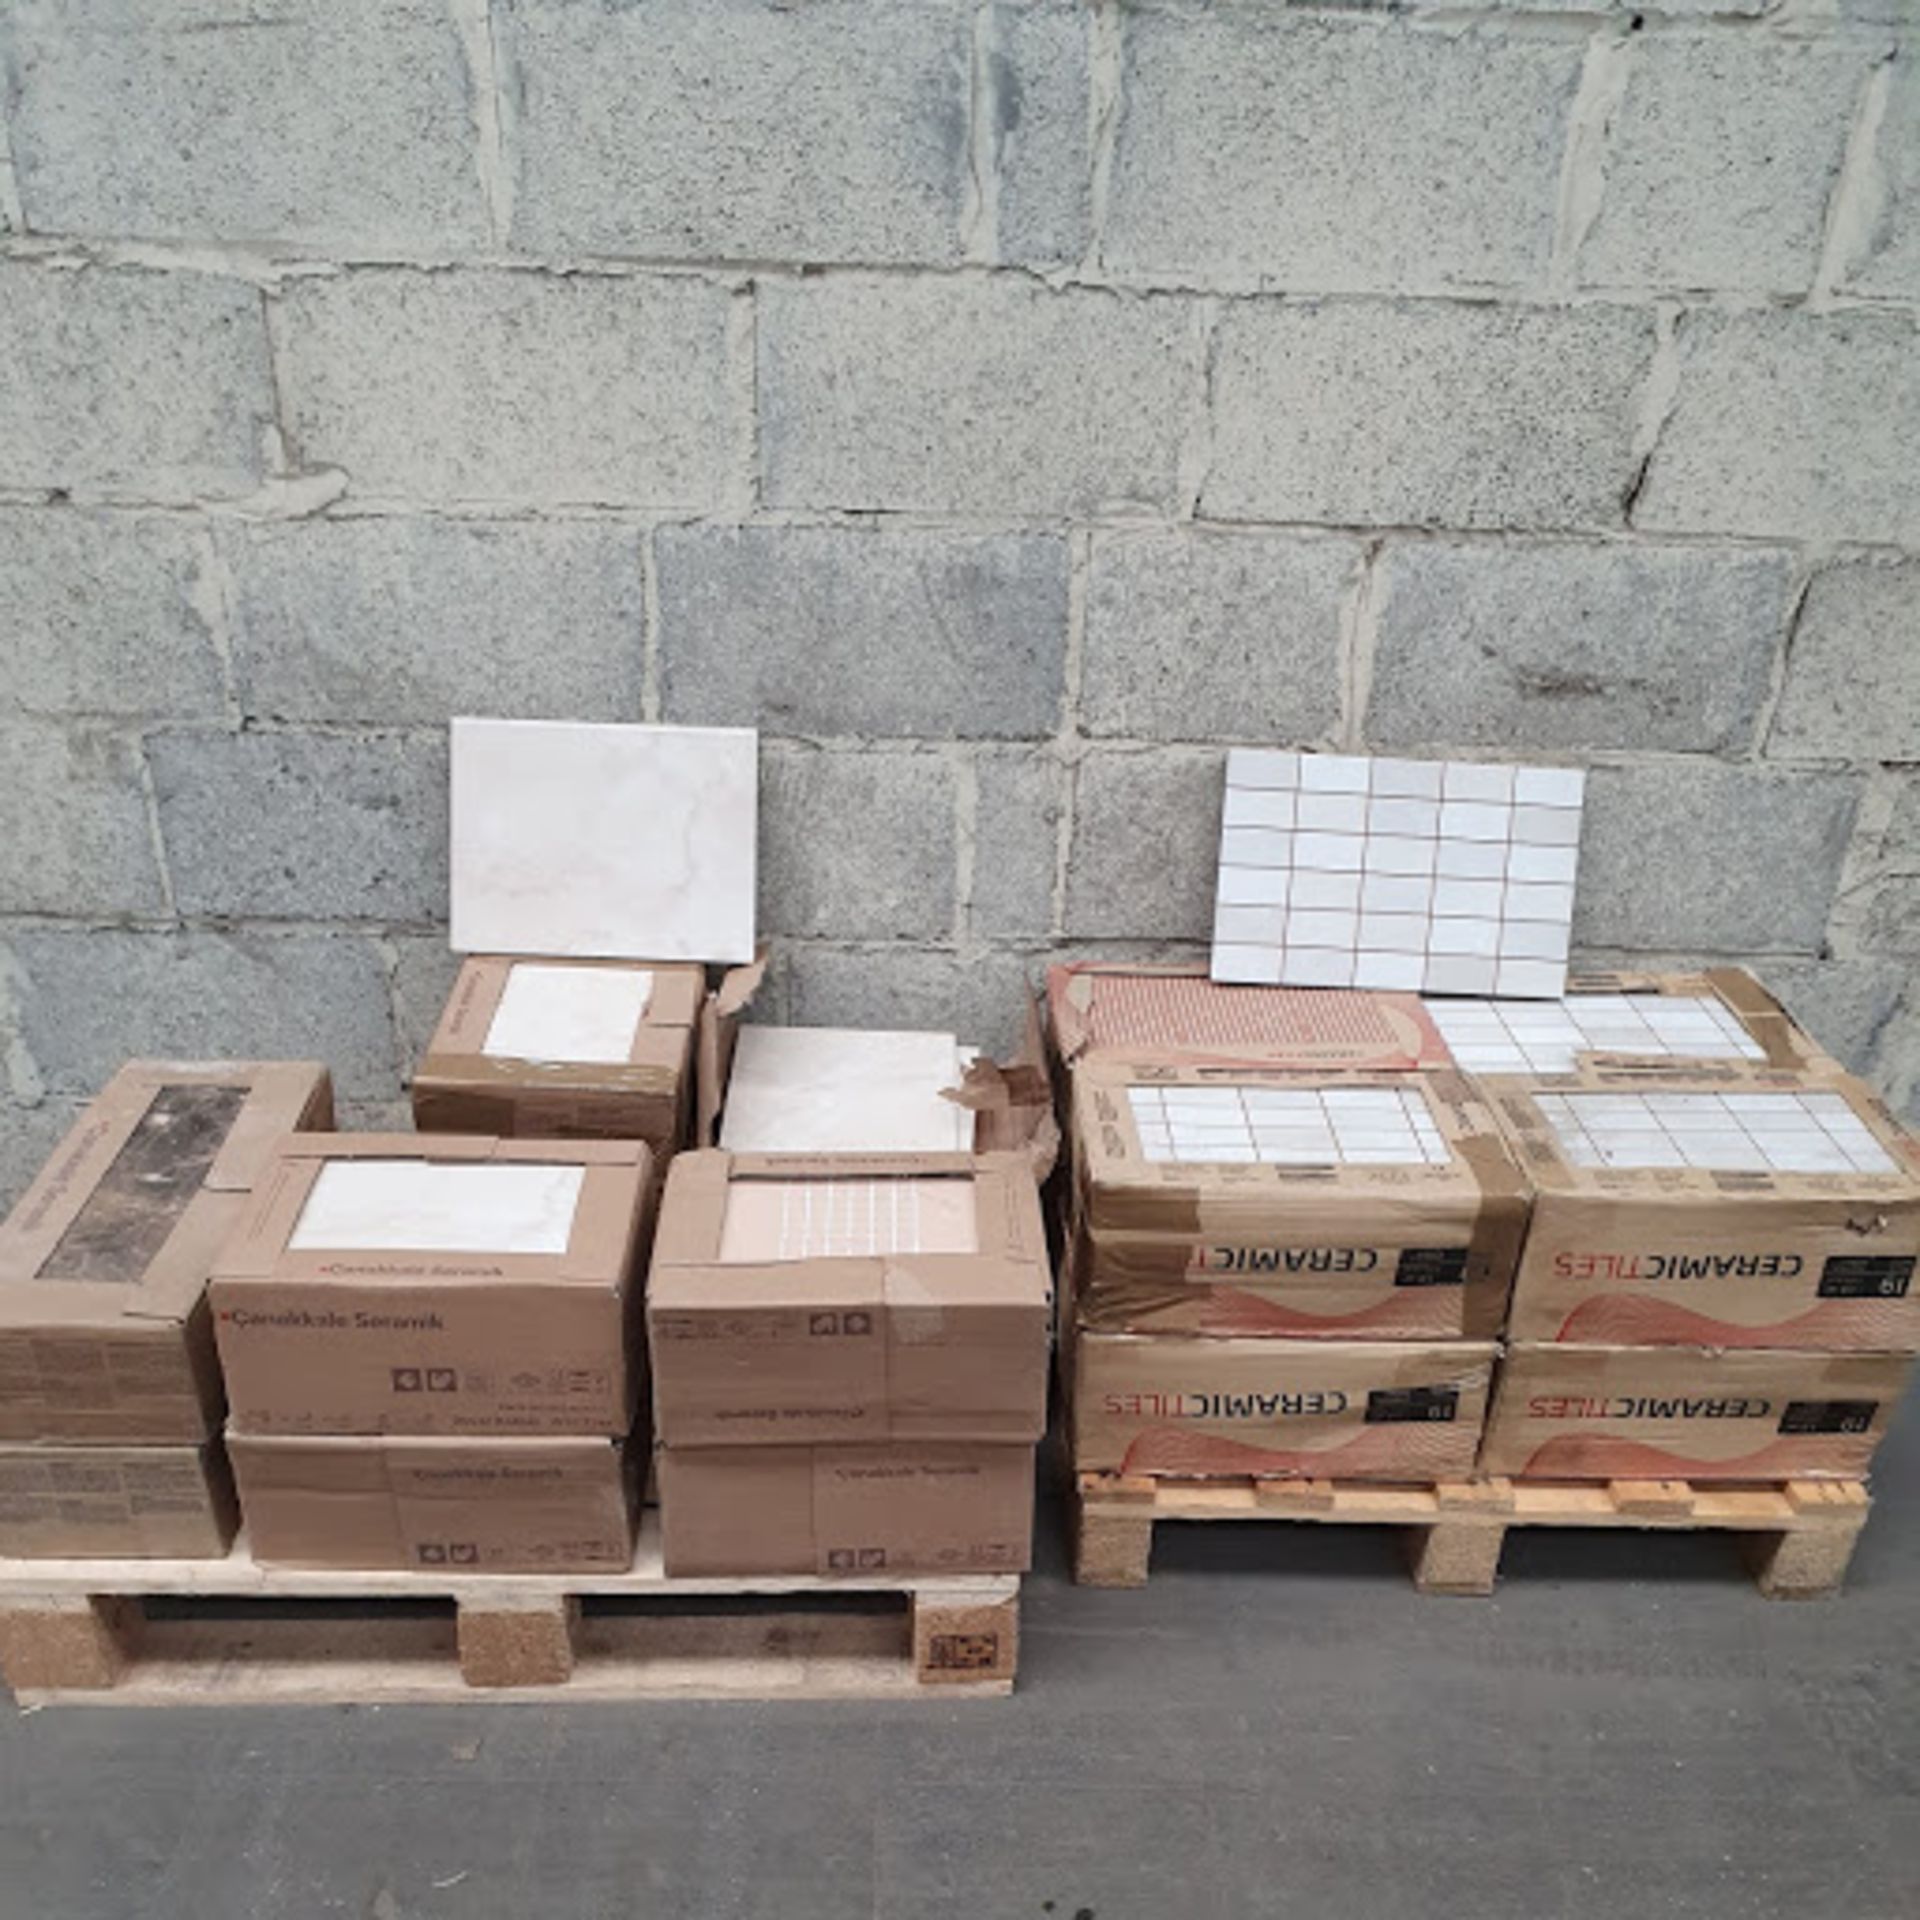 2 PALLETS OF MIXED TILES